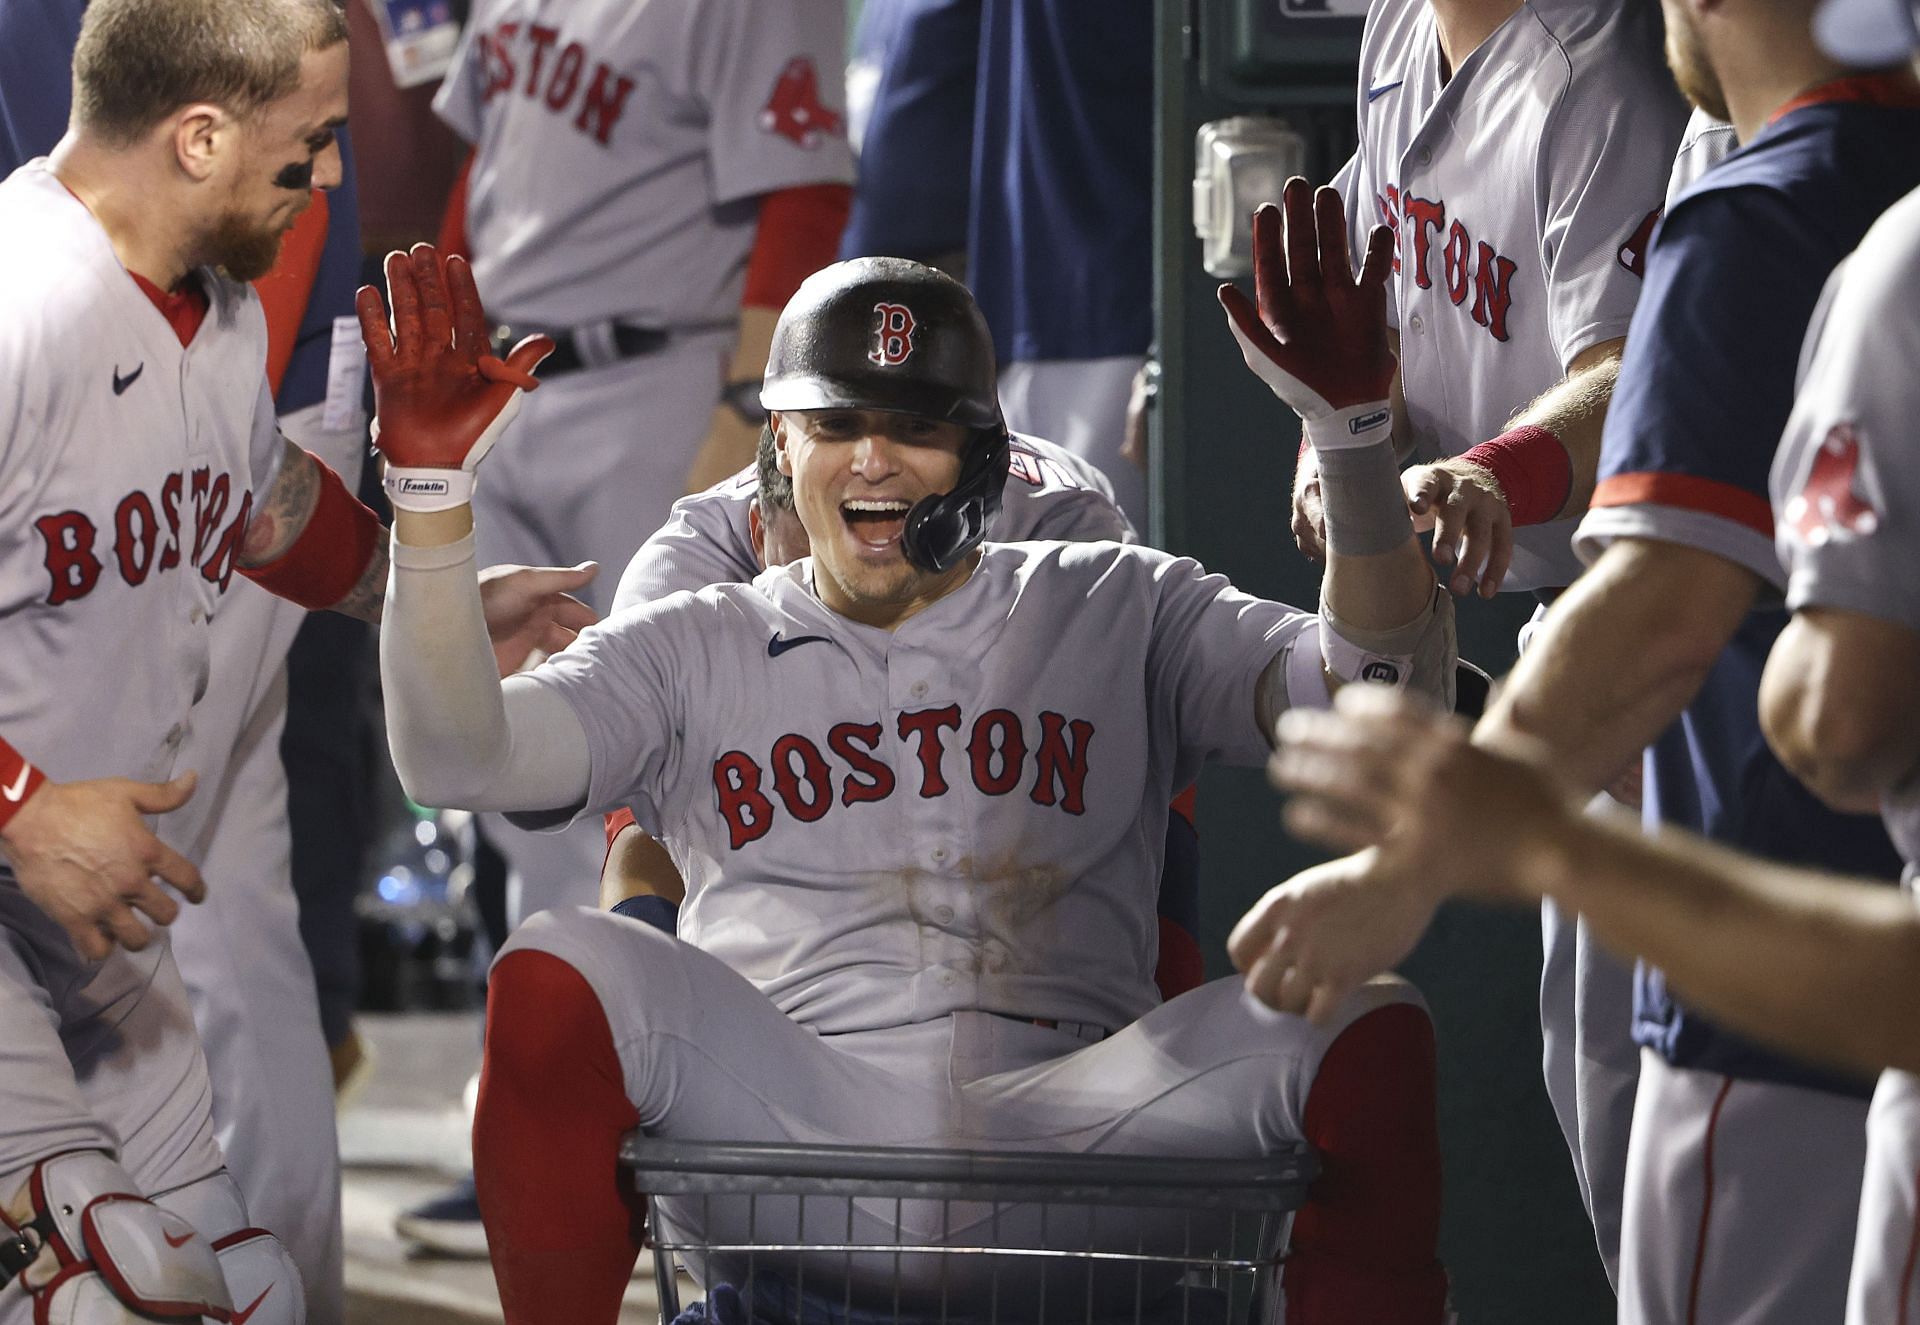 Boston Red Sox know how to have fun